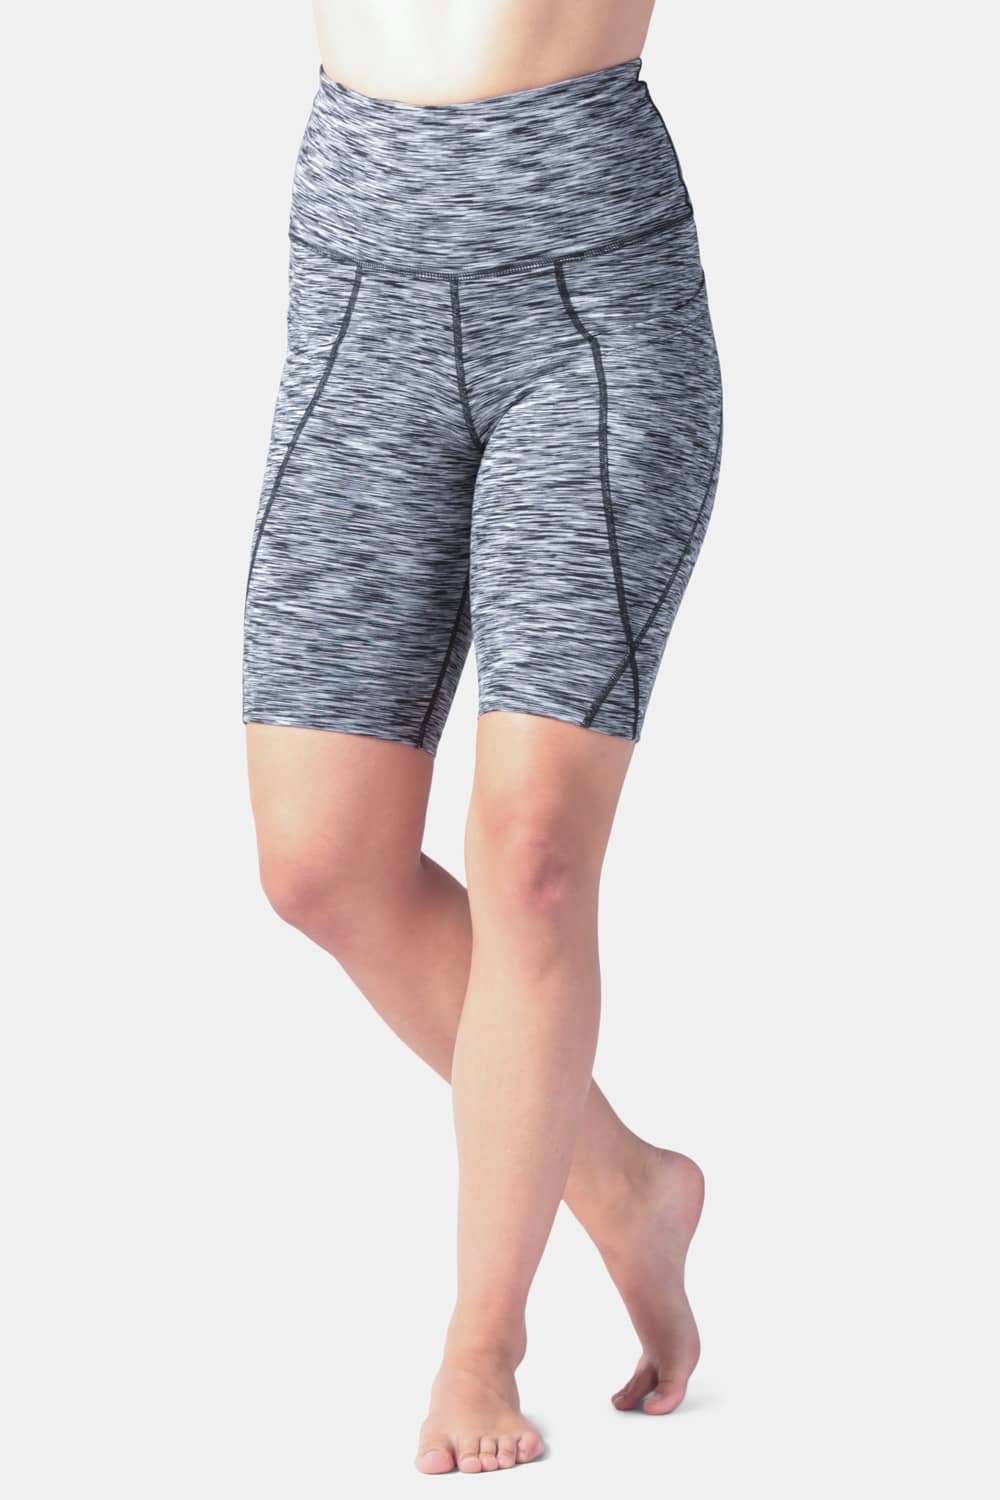 Women's EcoFabric™ Super High-Rise Active 9" Biker Short Womens>Activewear>Yoga Pants Fishers Finery Black White Space Dye X-Small 